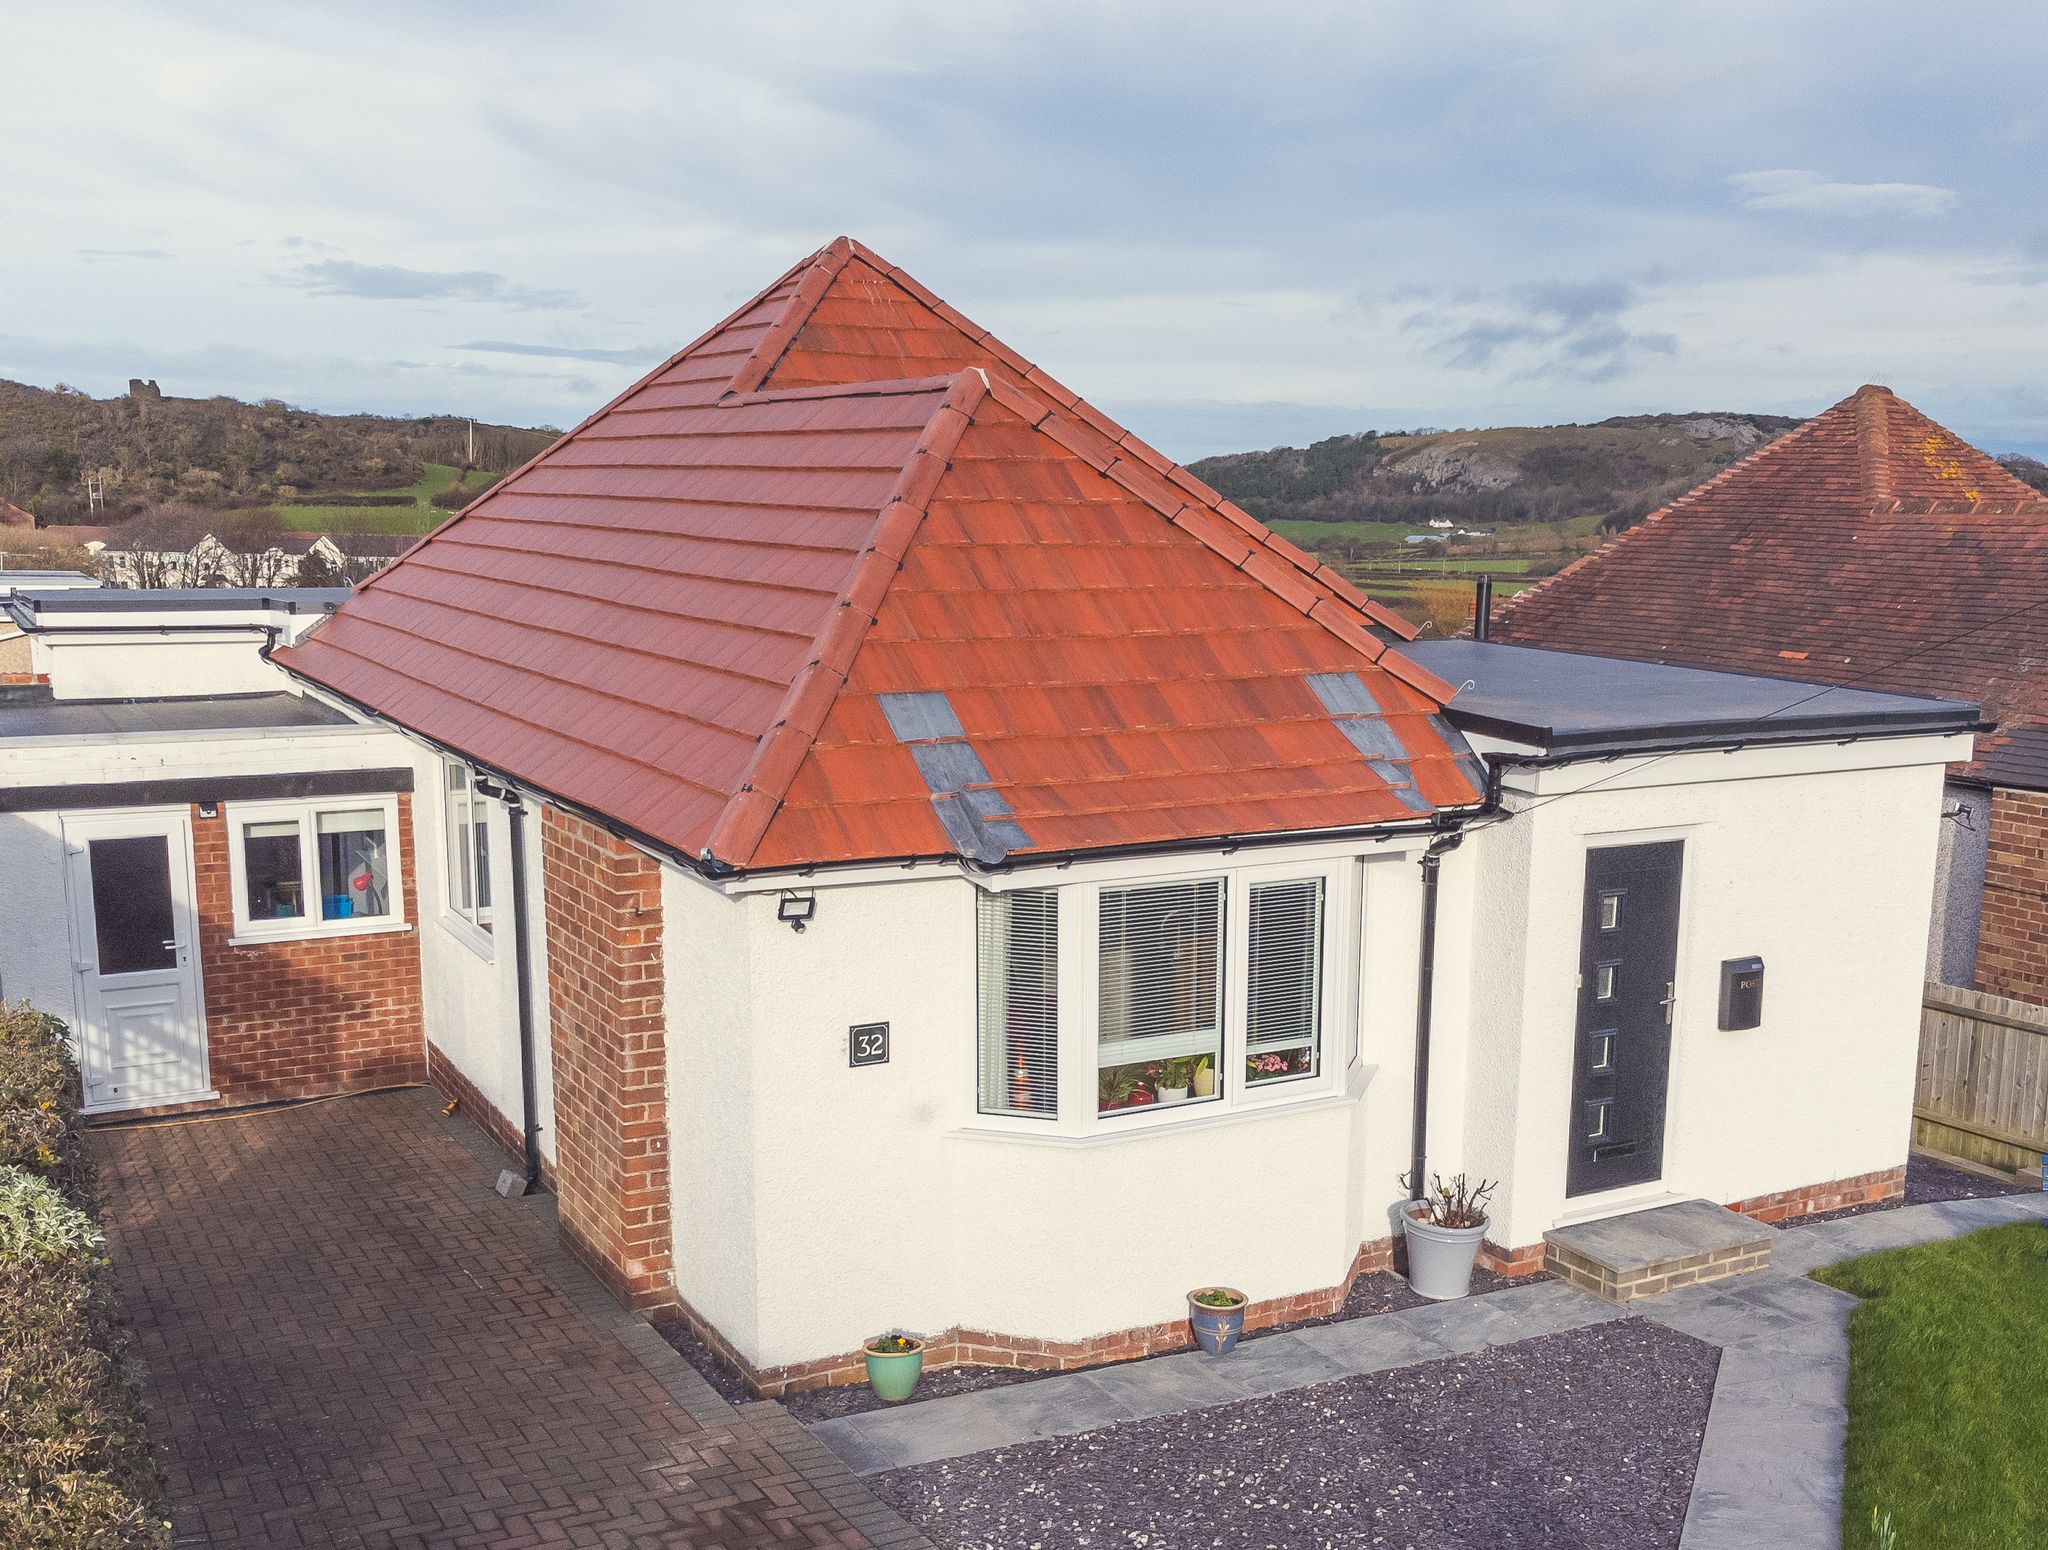 Tile Roof Contractors Pentre Gwynfryn, LL45 - DD Roofing